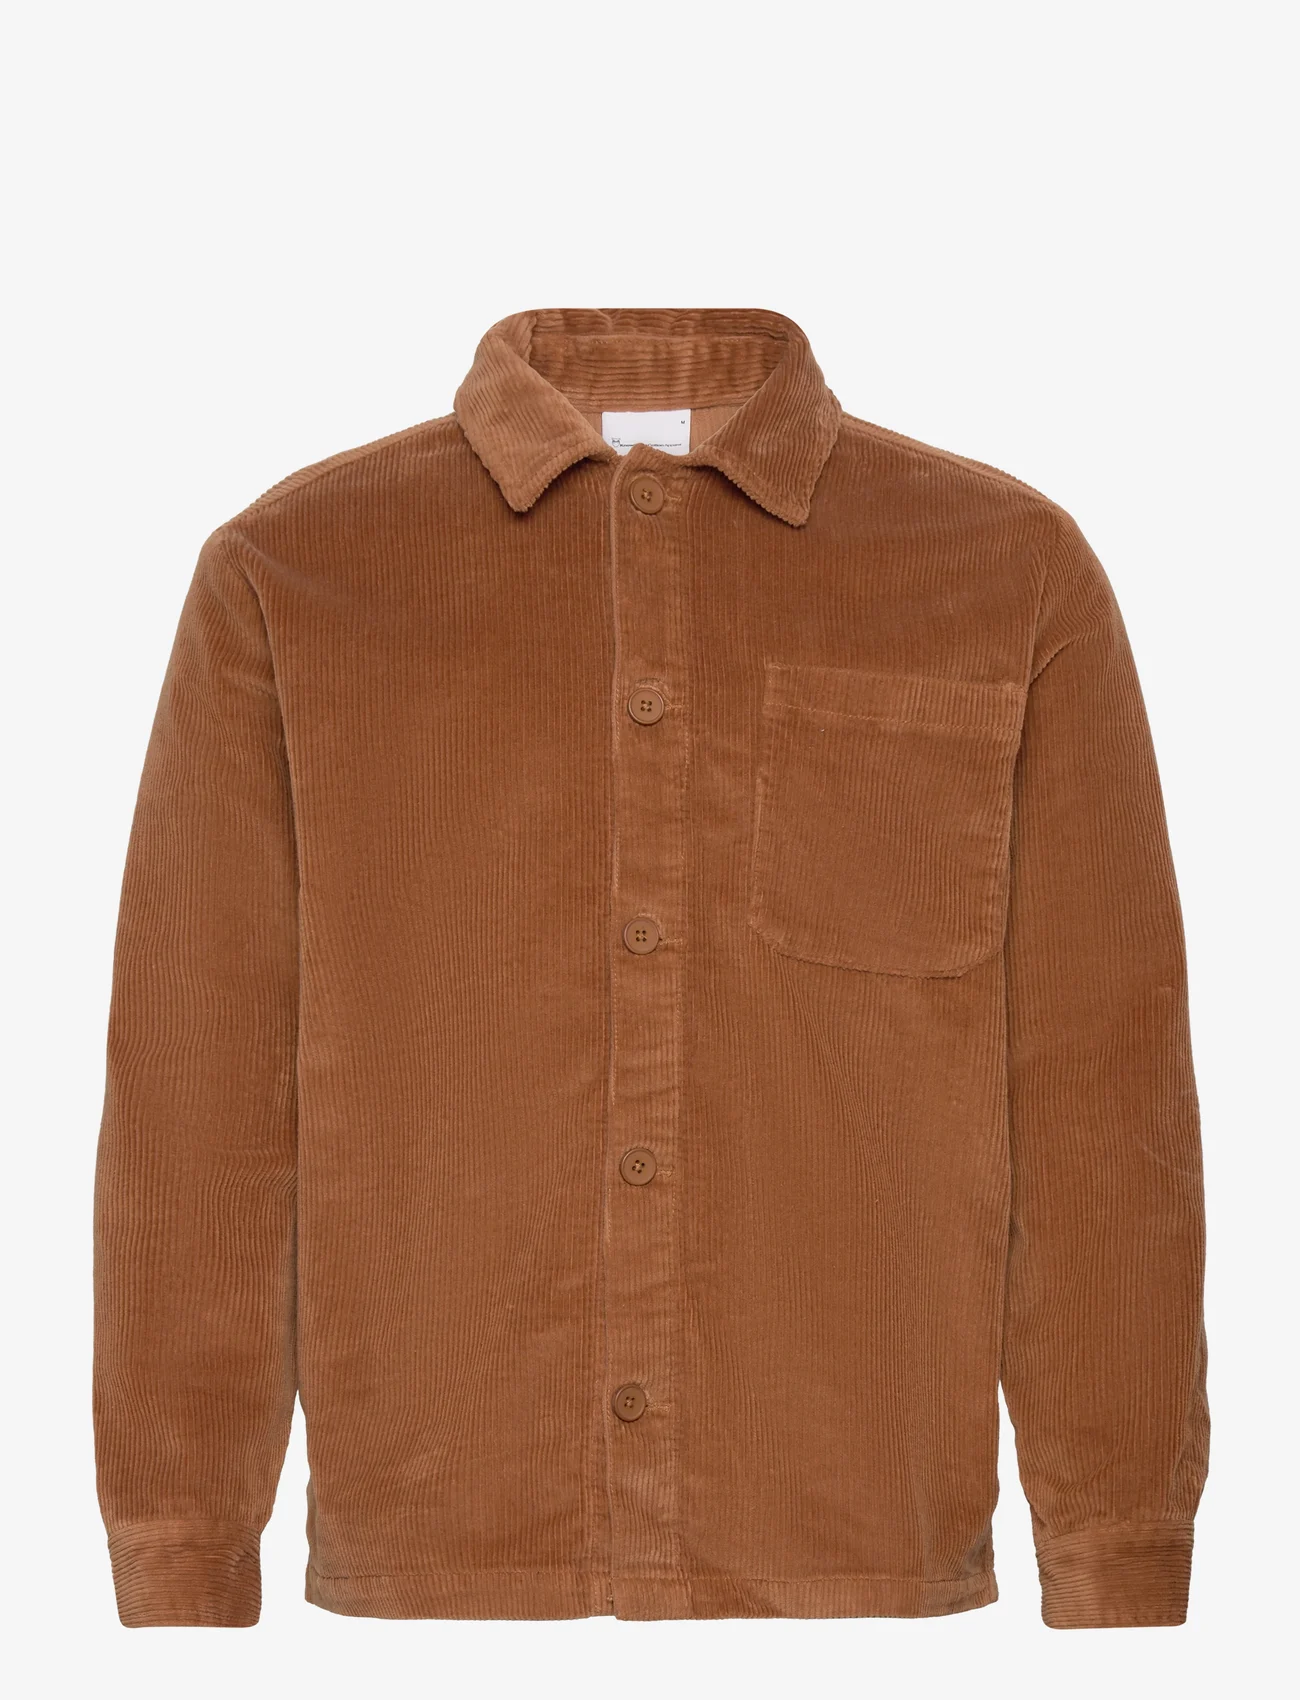 Knowledge Cotton Apparel - Stretched 8-wales corduroy overshir - men - brown sugar - 0